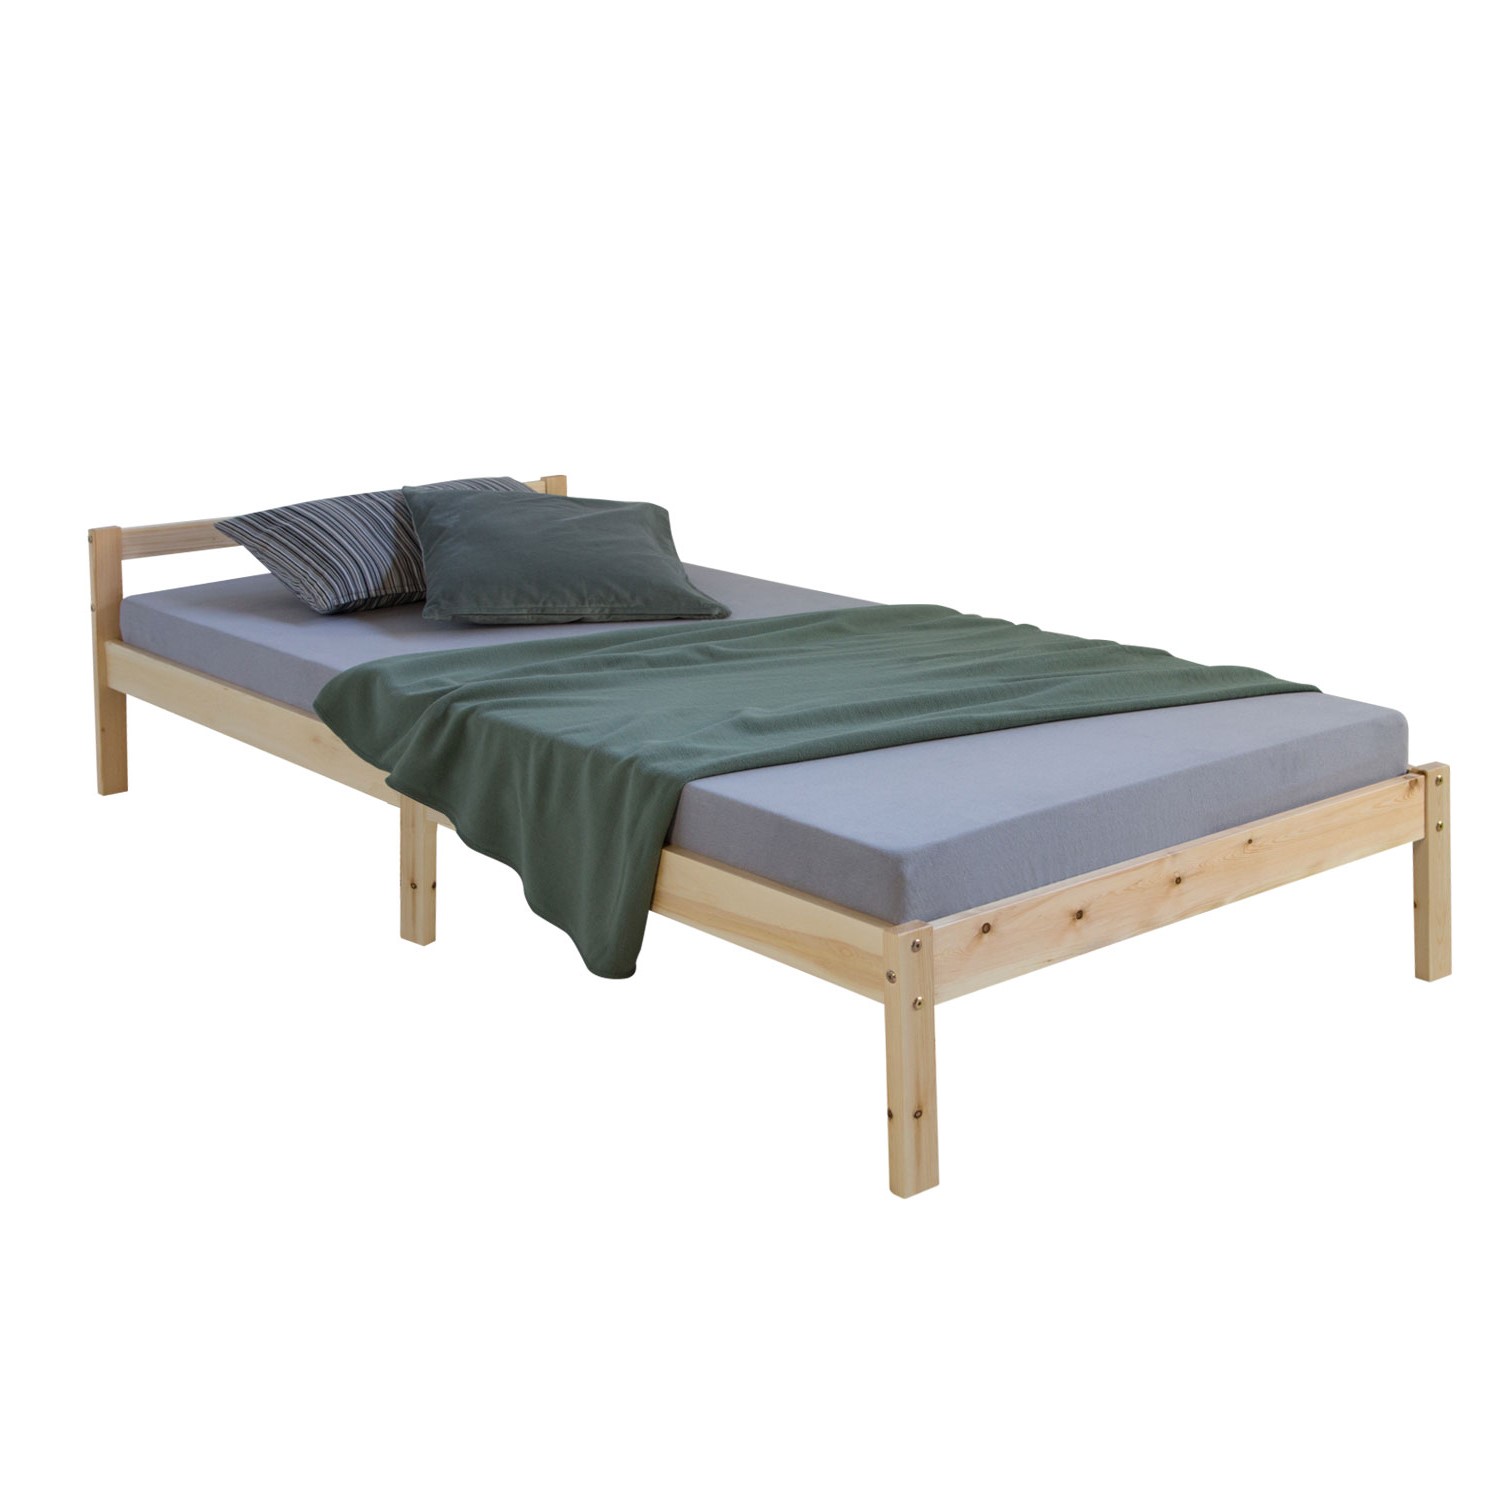 Wooden bed youth bed 90 140 x 200 cm natural white with slatted frame children's bed day frame